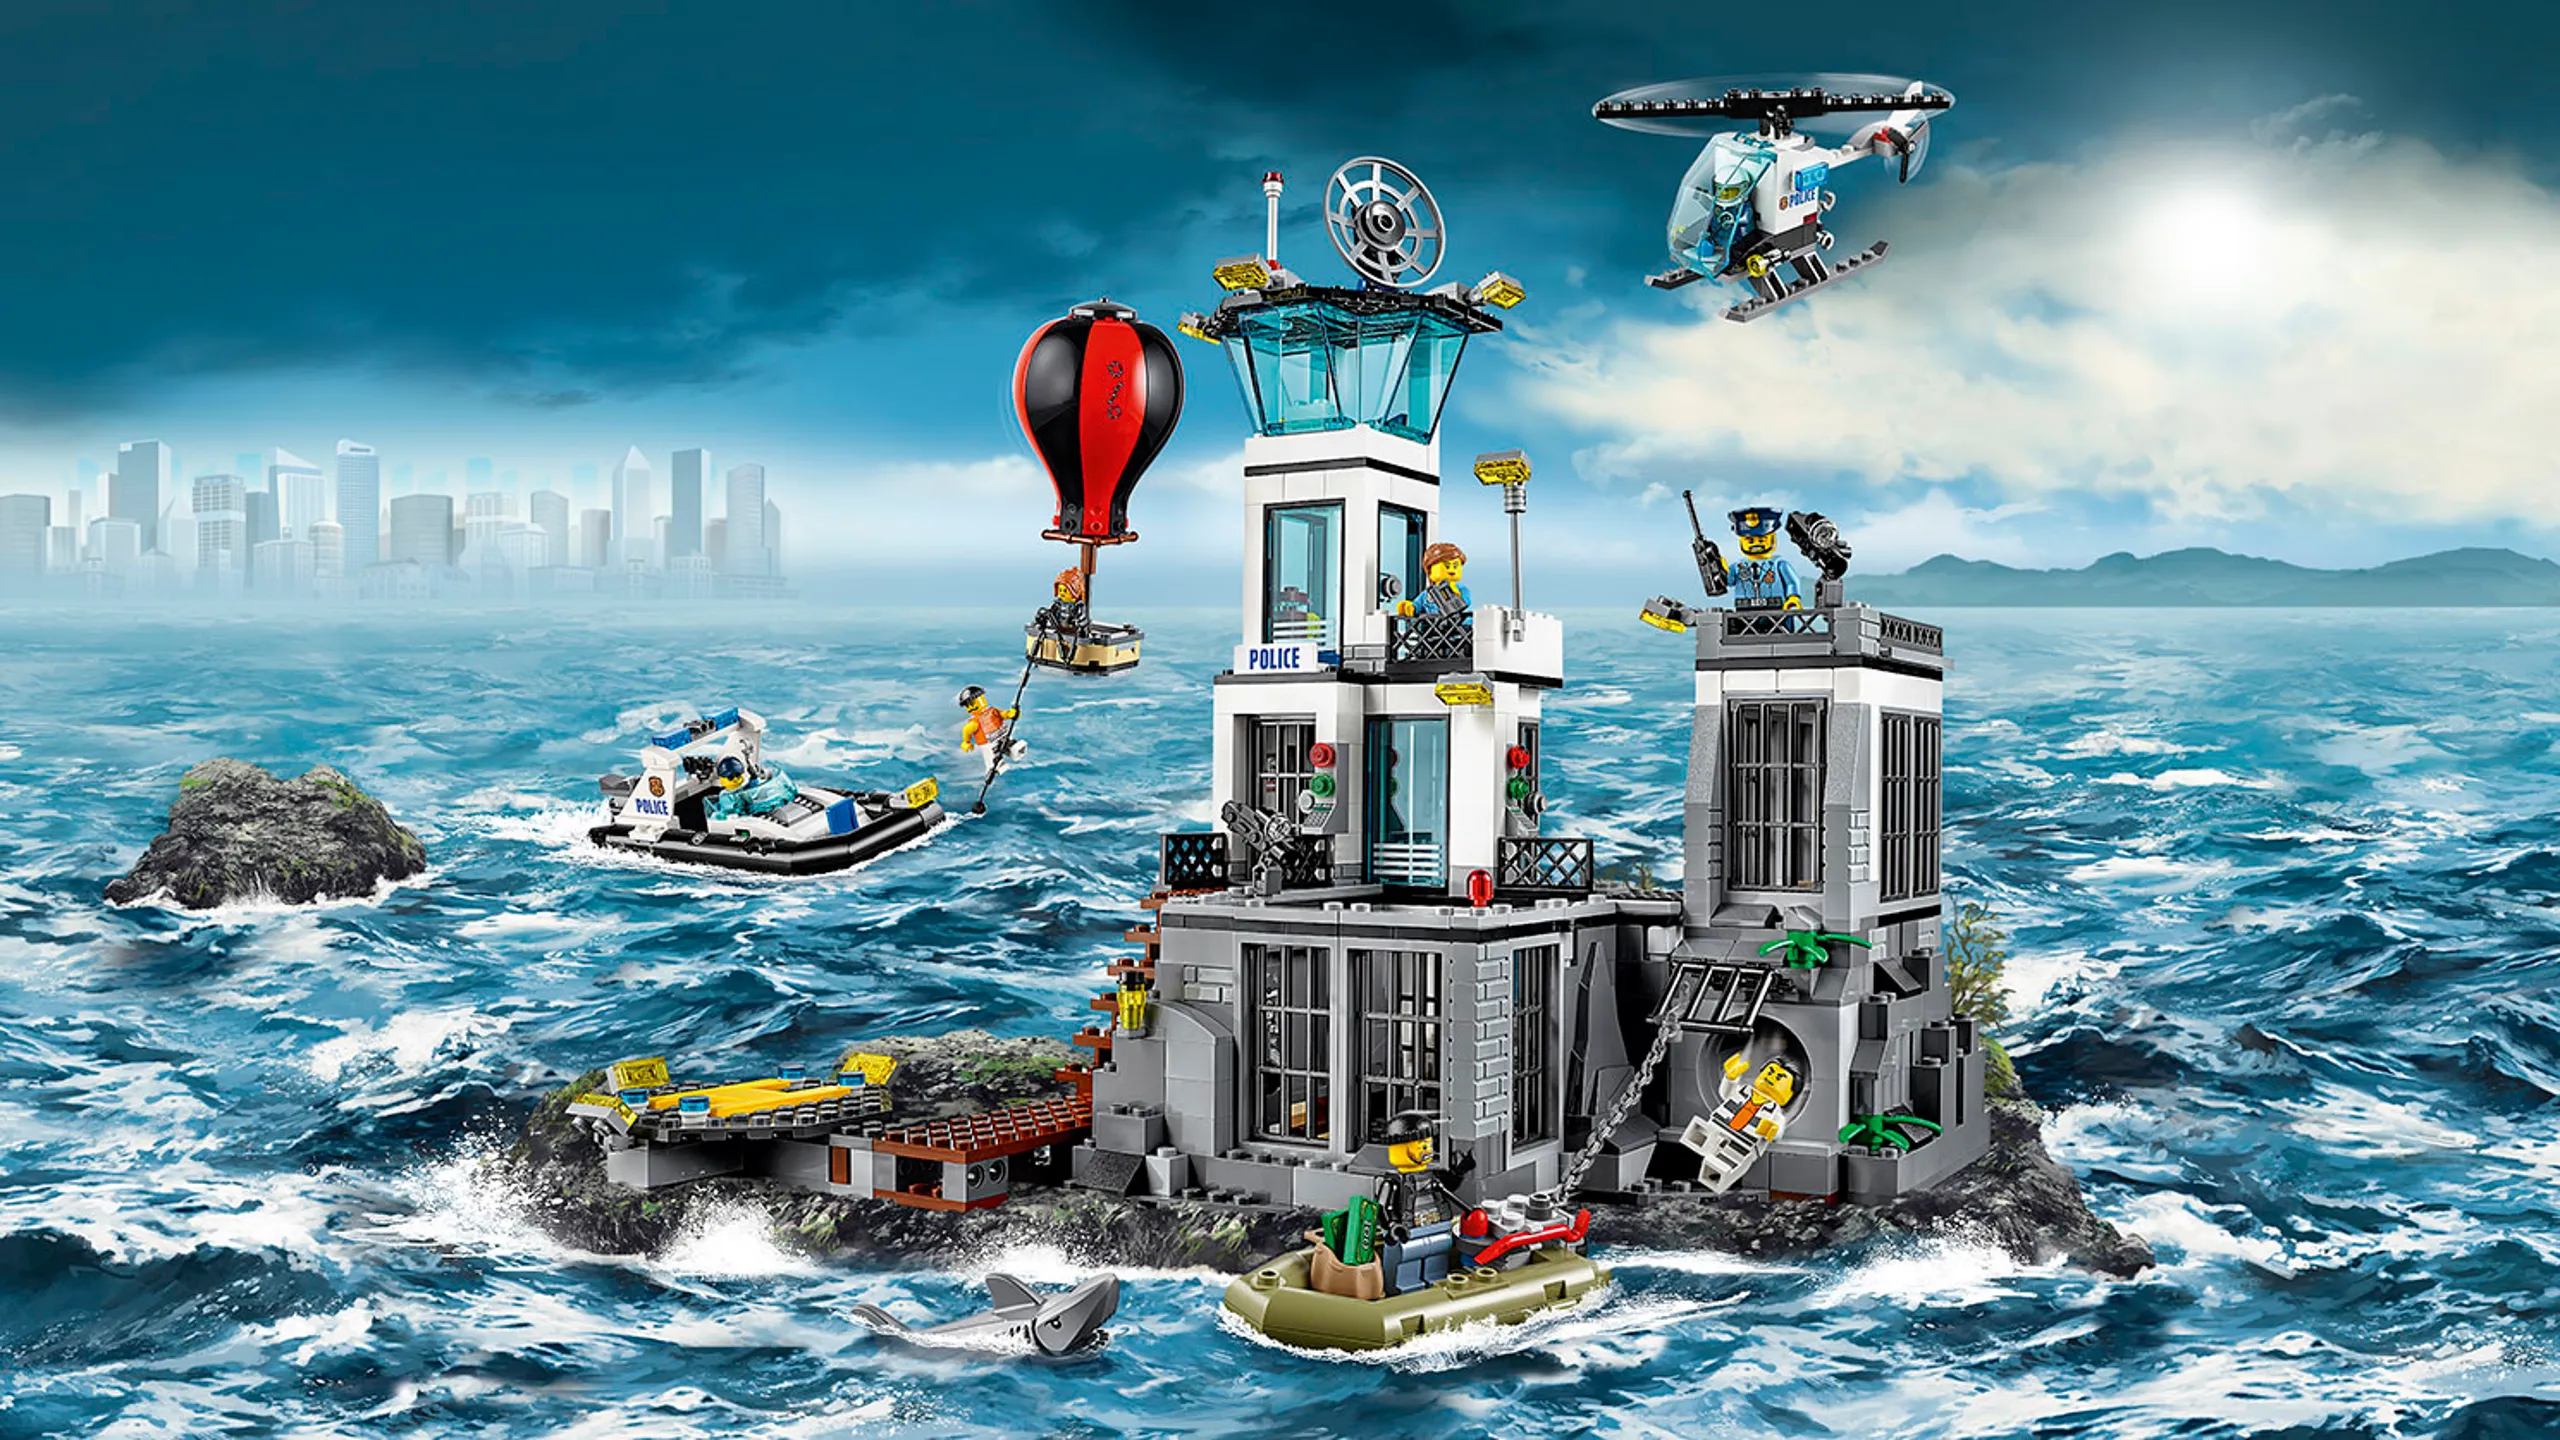 LEGO City Prison Island with minifigures and vehicles – Prison Island 60130